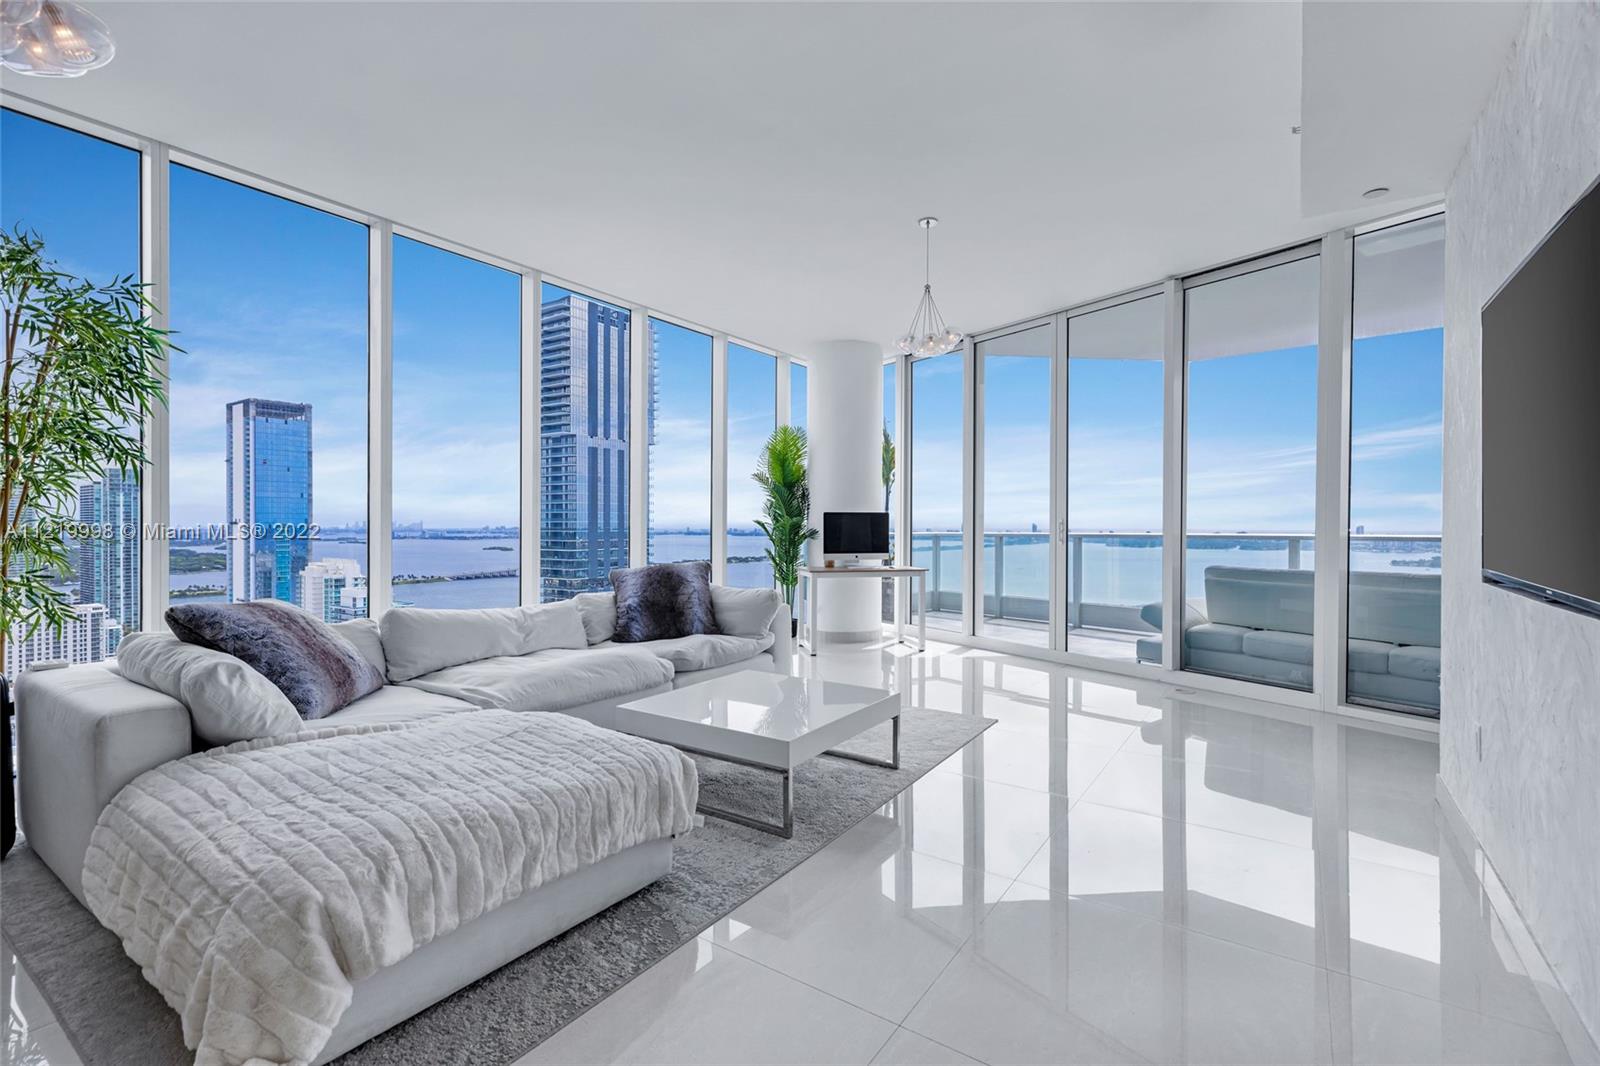 UNOBSTRUCTED ocean & Biscayne Bay views at the ultra luxury Paramount Bay. This gorgeous fully furnished NE corner unit feat. 2 beds/2.5 baths, private foyer with 2 elevators, split floor plan with private bathrooms, updated porcelain floors, brand new AC unit, designer light fixtures, private laundry room & more. Amenities designed by Lenny Kravitz include sunrise & sunset resort-style pools with private cabanas, yoga & Pilates studio, kids room, business center, party room, state-of-the-art gym facility & 6,000 sqft spa, valet services & 24hour security. Centrally located in the heart of Edgewater across from Margaret Pace Park. Minutes away from Downtown, Brickell, Midtown, Wynwood, Miami Beach & MIA intl airport. Virtual 3D tour is available. A must see! Price is reduced to sell fast.